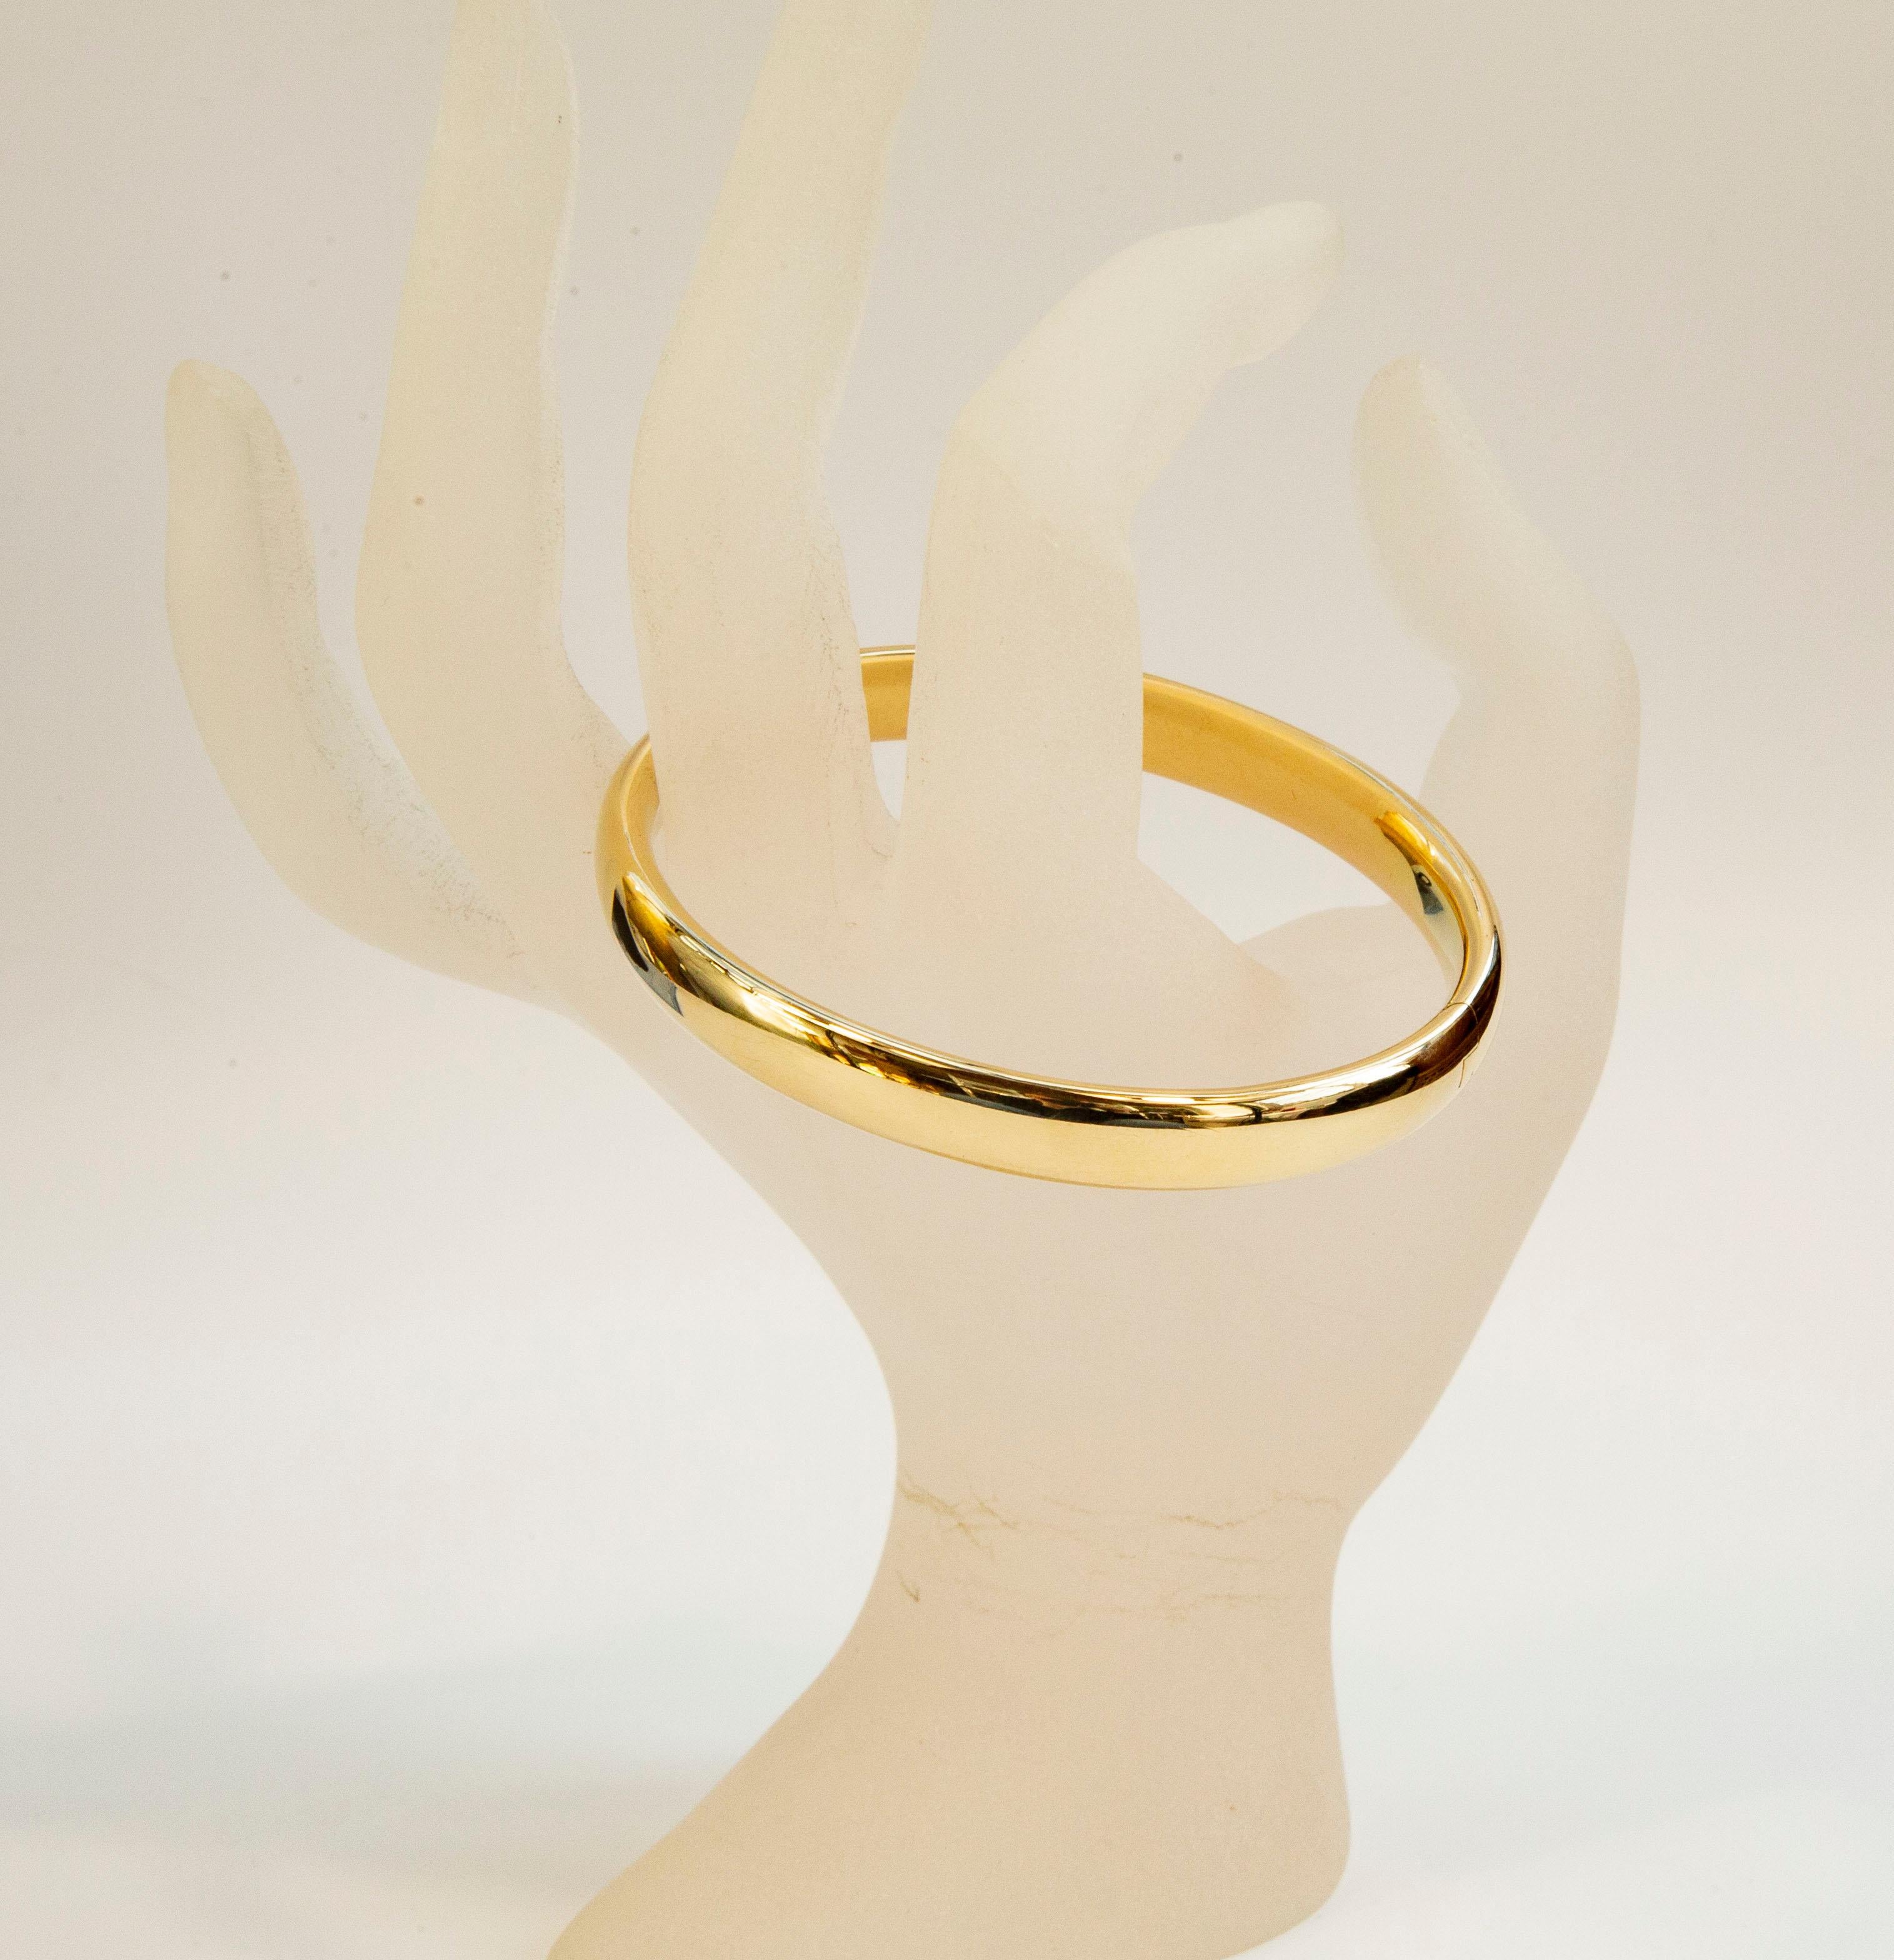 A vintage bangle, rigid bracelet made of 14 karat solid yellow gold. The bracelet features a hinge in the middle and a box clasp. 
The style of the bracelet is classic and minimalist. It would be a great addition of any type of outfit for a woman of